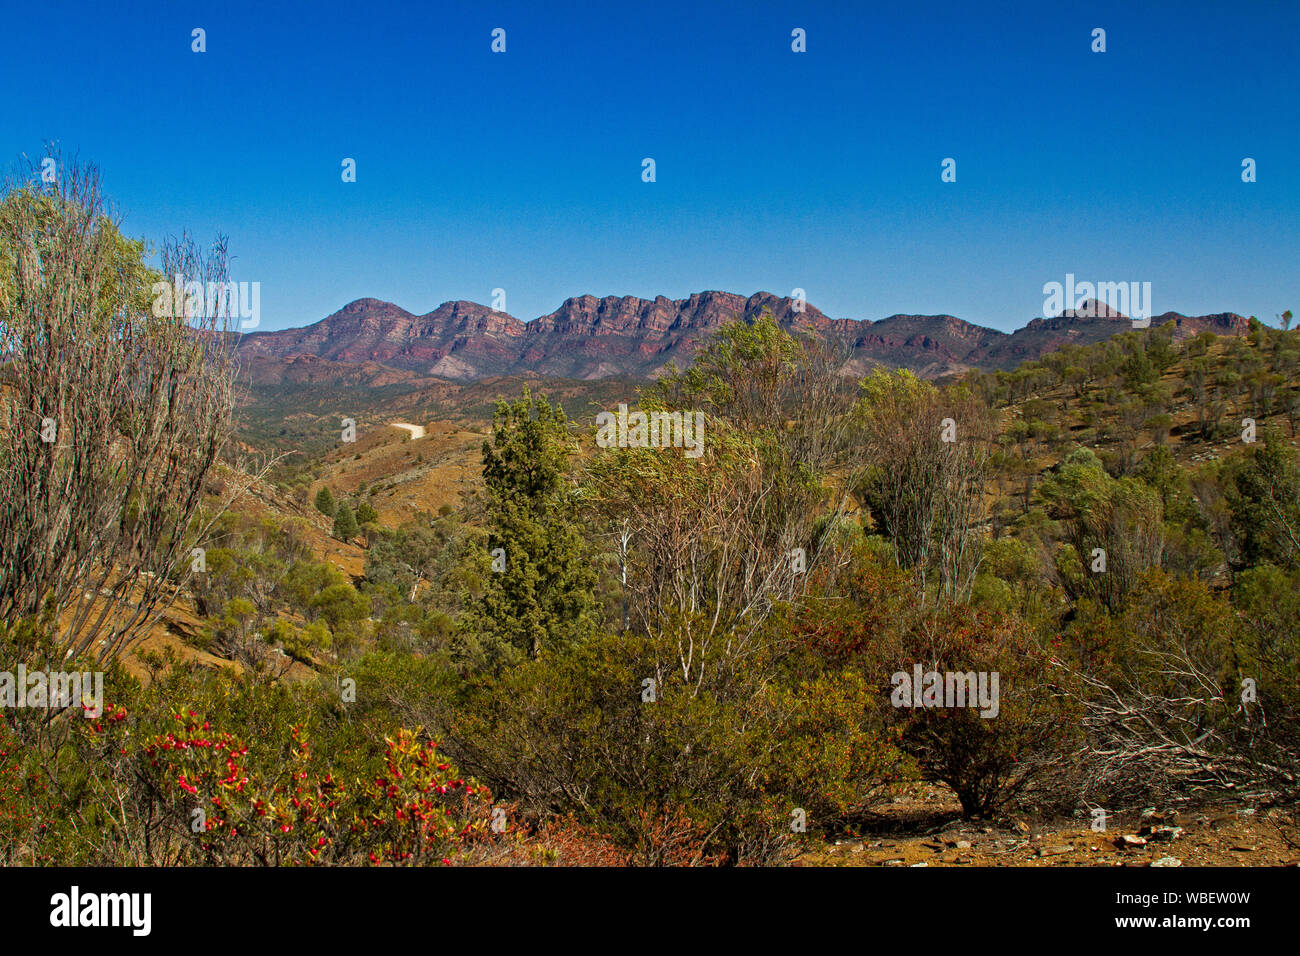 Flinders Ranges National Park with rugged red rocky ranges reaching up into blue sky and red wildflowers in foreground, South Australia Stock Photo